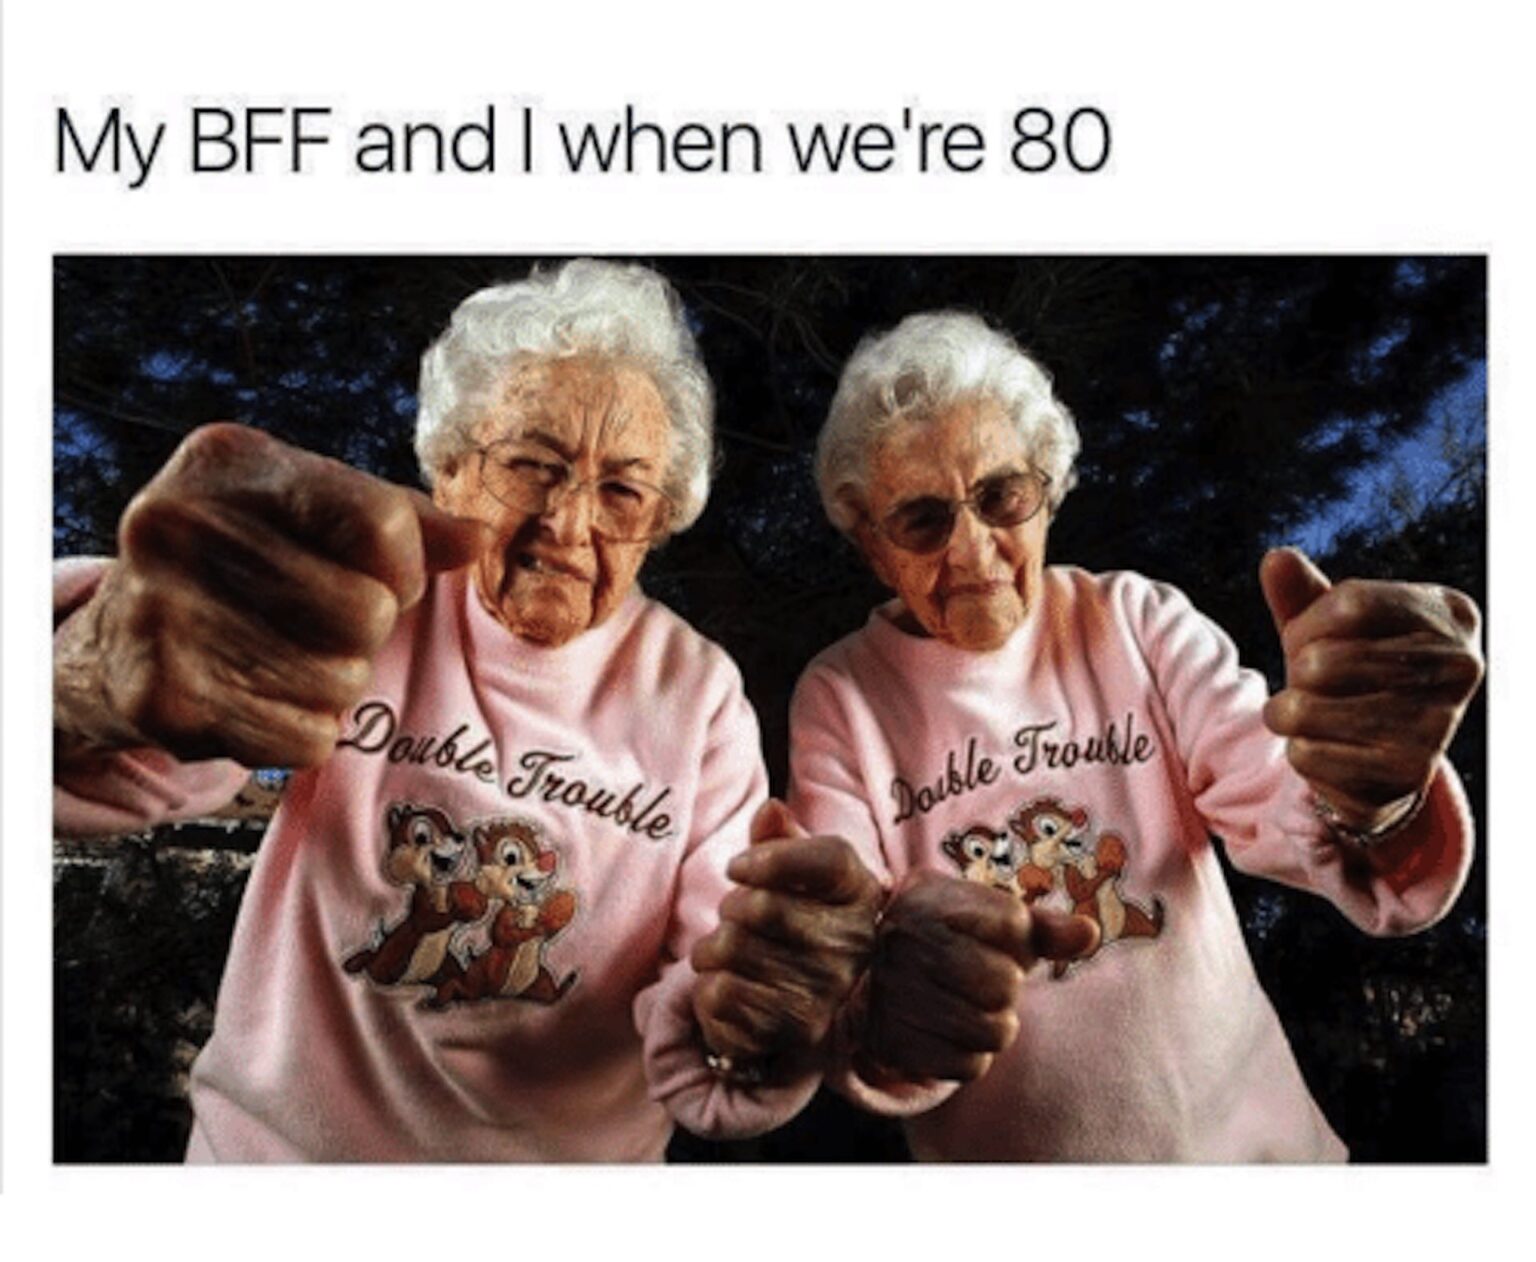 We all have that one person who just gets us like no other. If you have a special BFF, laugh along at all the best friend memes we've found here.